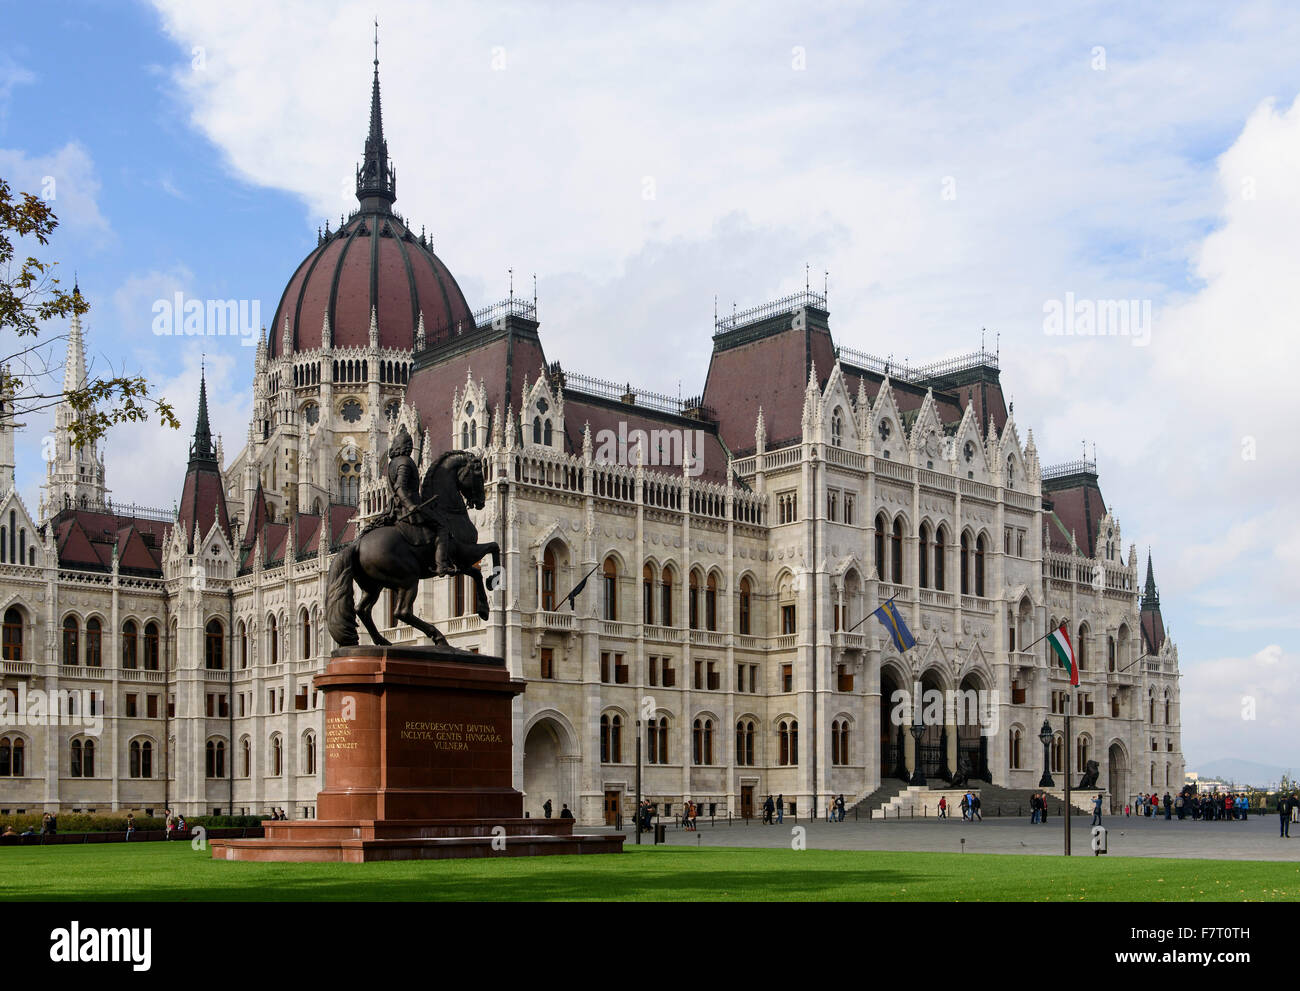 Parlament, Országház, and equestrian statue at Kossuth Lajos tér in Budapest, Hungary UNESCO-world heritage Stock Photo